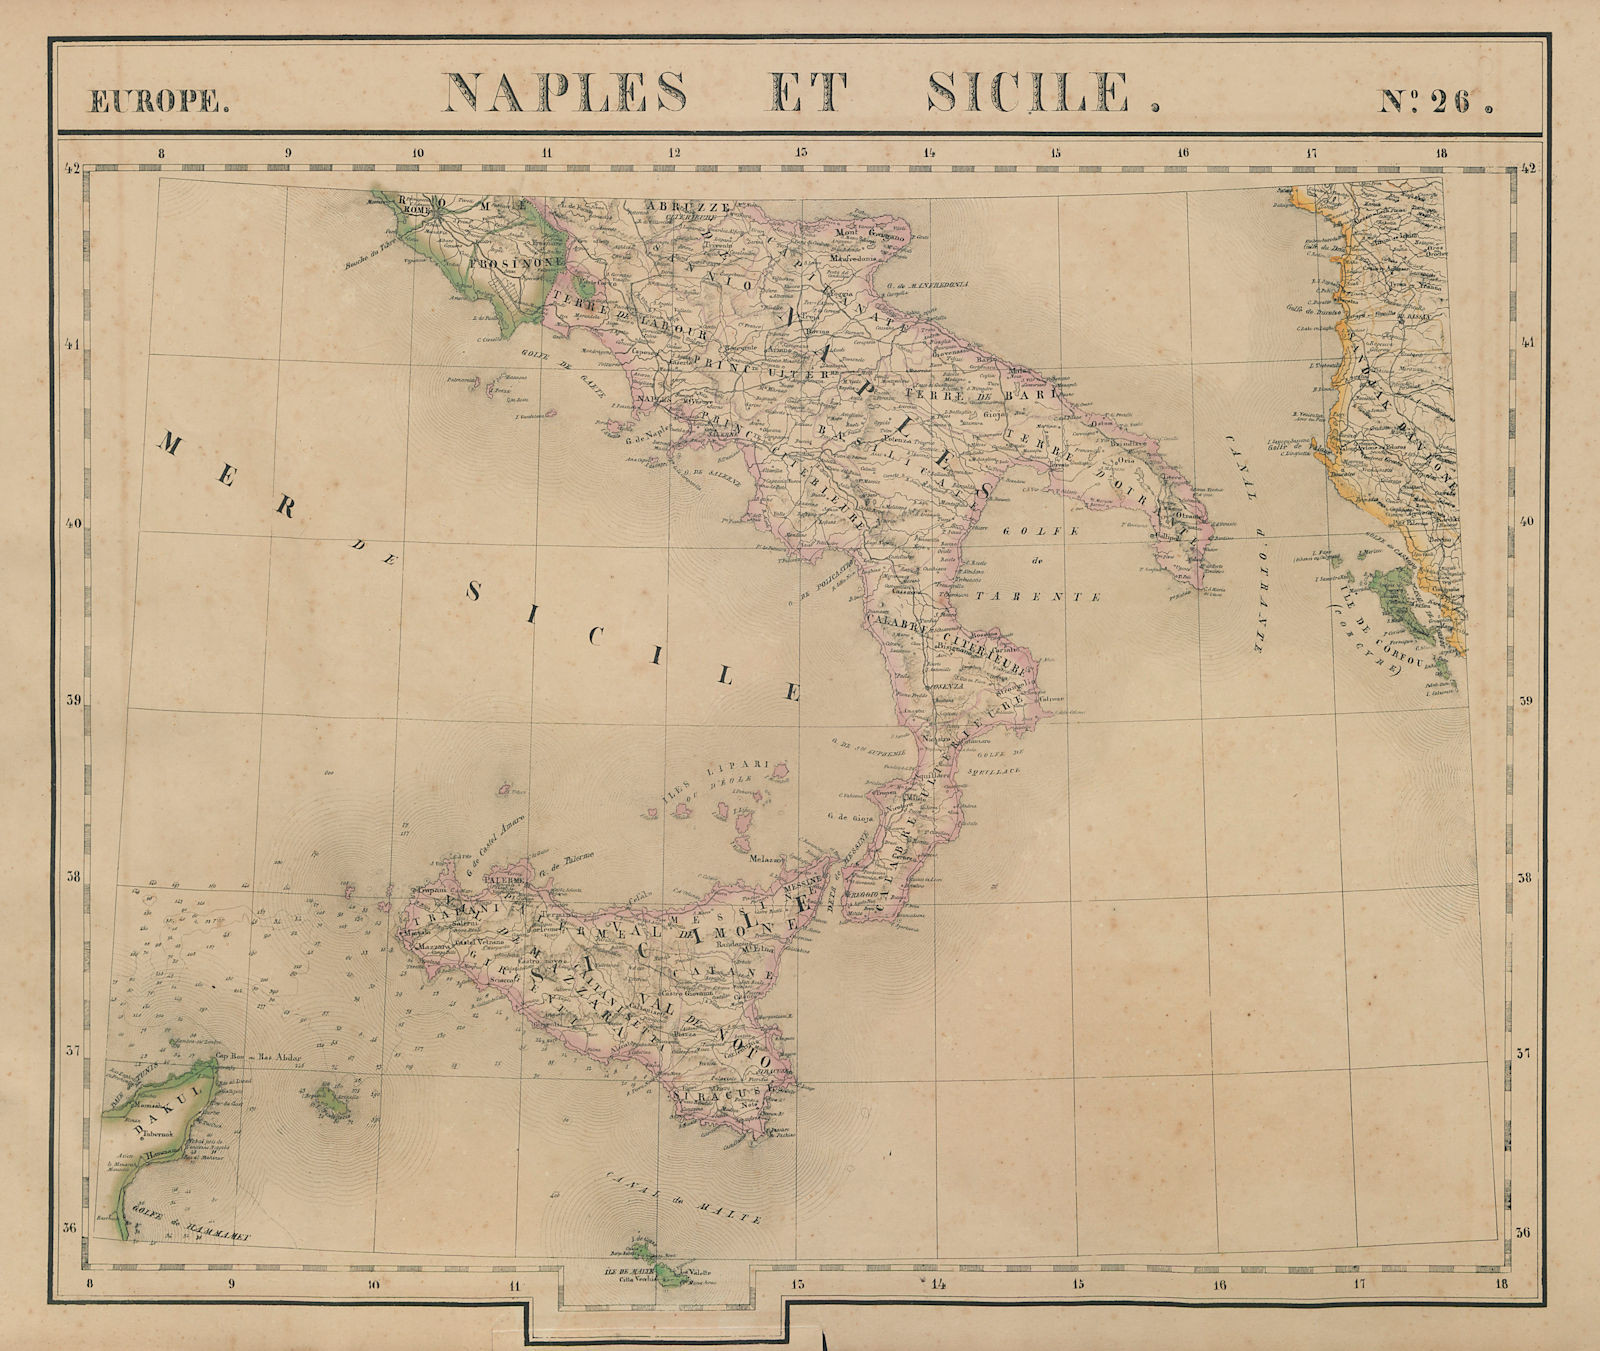 Associate Product Europe. Naples & Sicile #26 Southern Italy Sicily Albania. VANDERMAELEN 1827 map